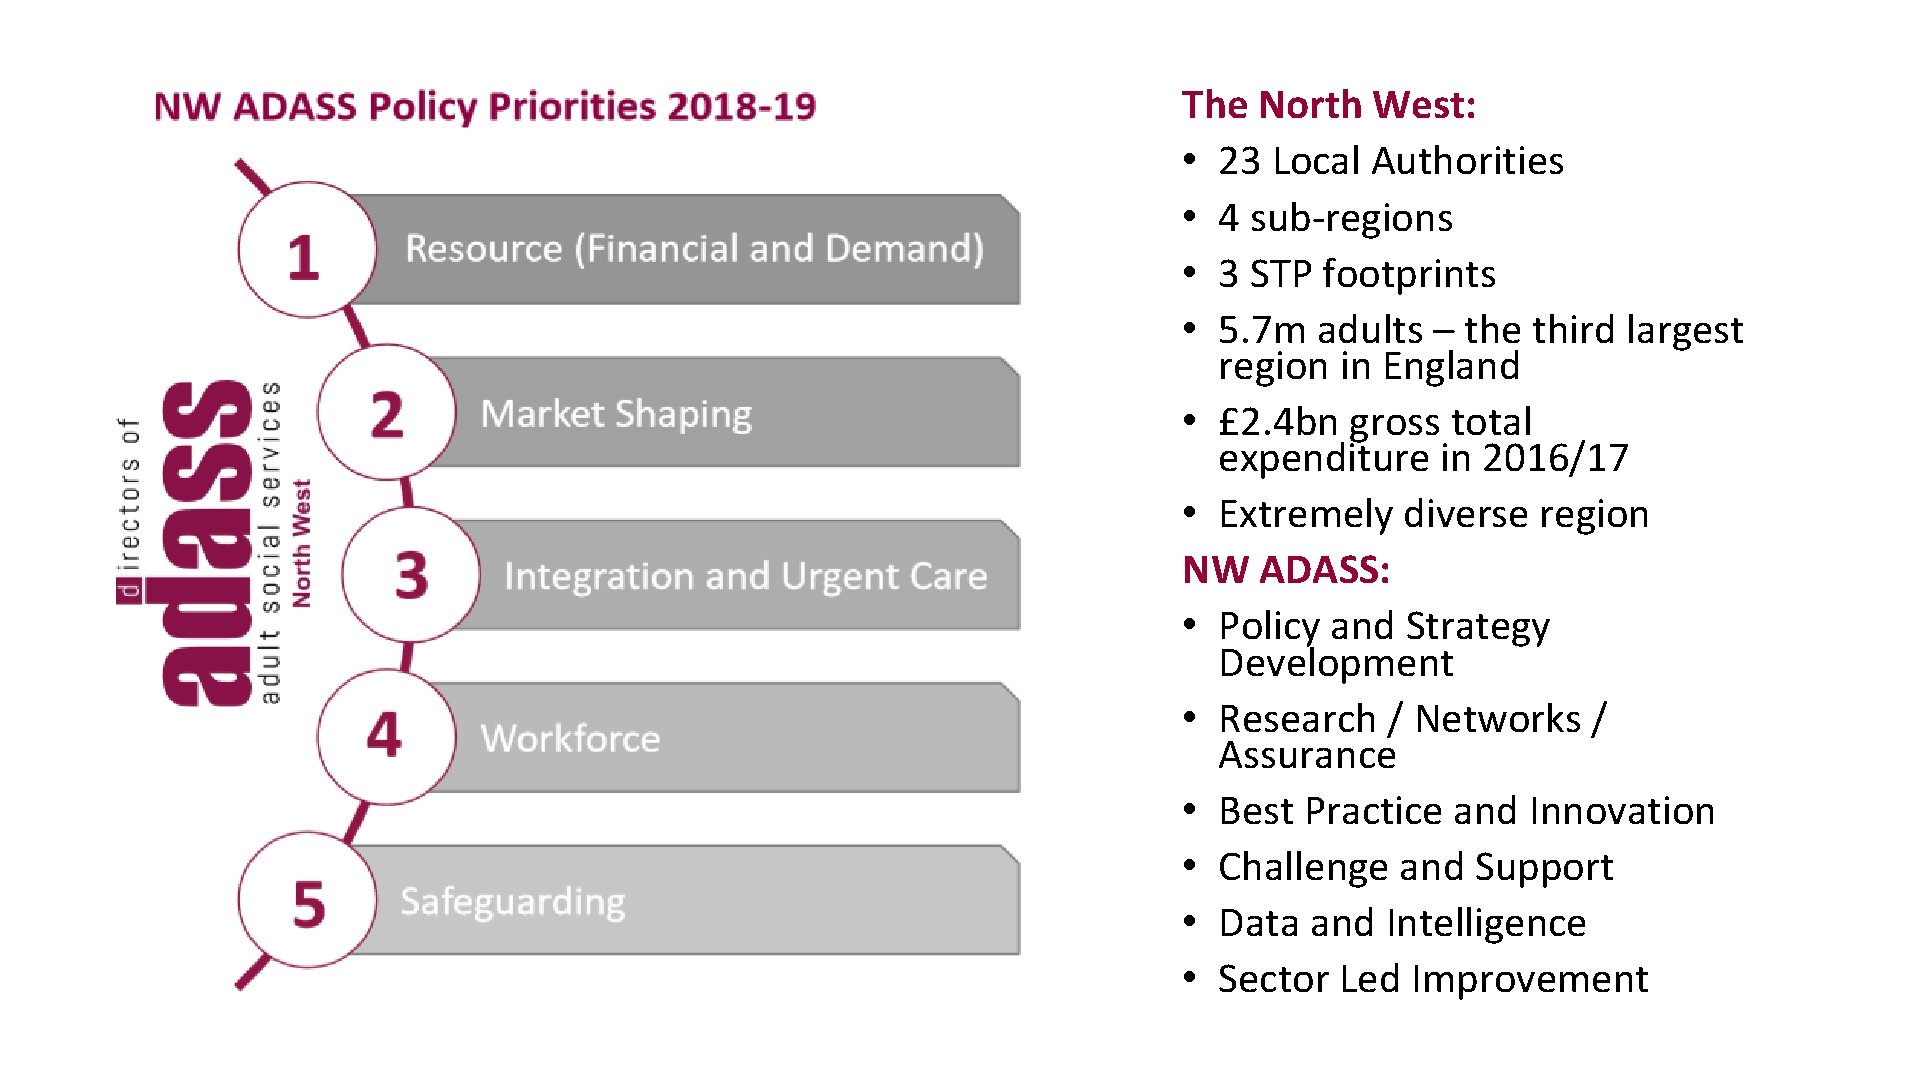 The North West: • 23 Local Authorities • 4 sub-regions • 3 STP footprints